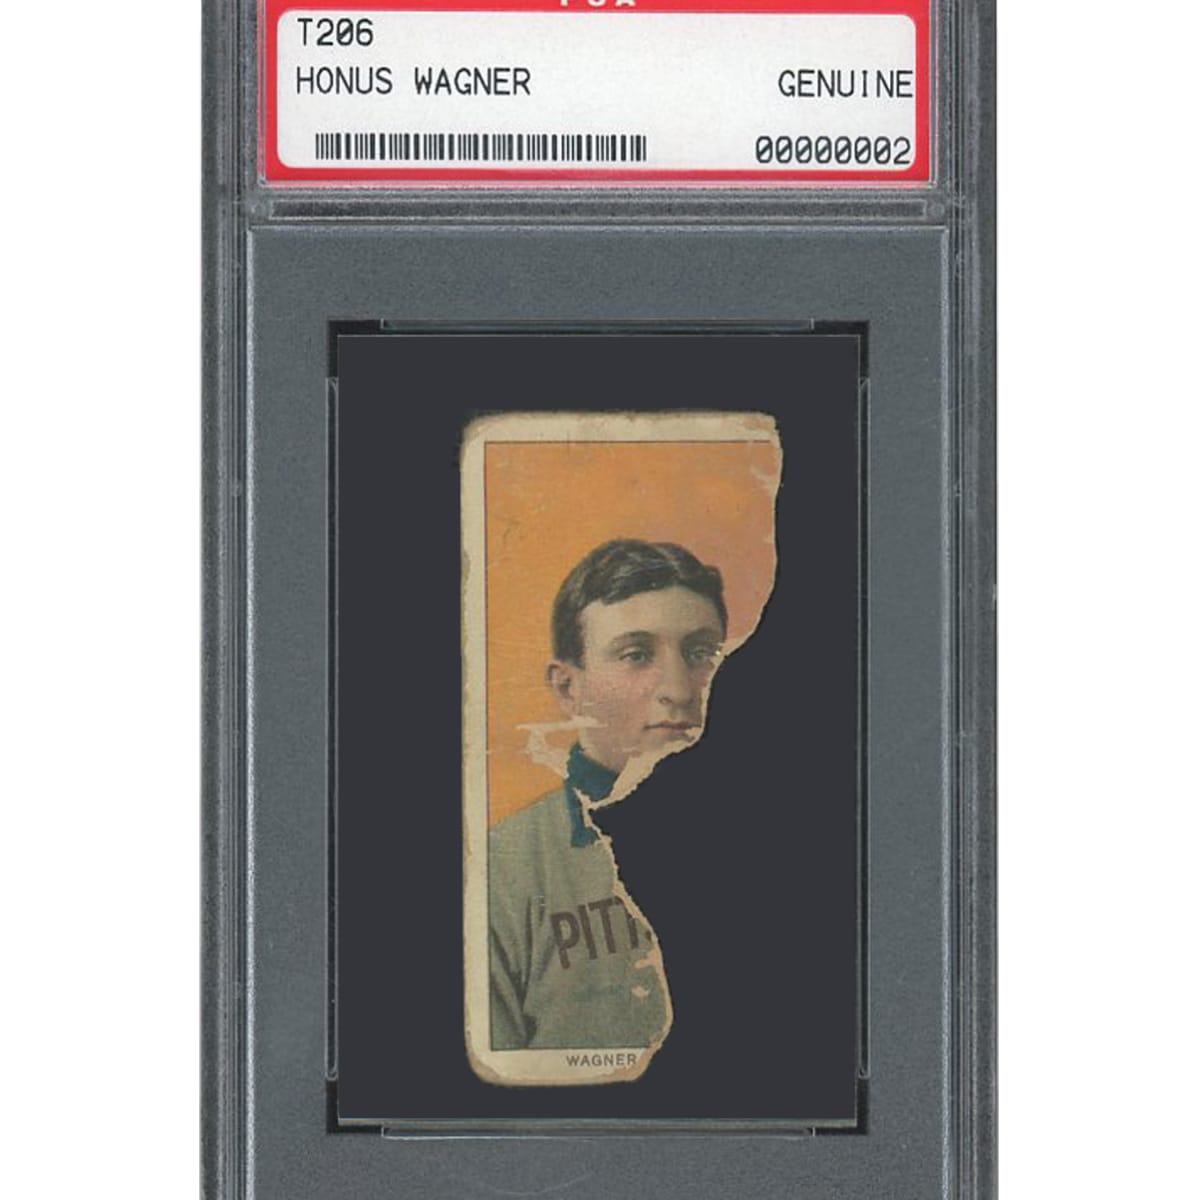 Even half of a Honus Wagner card is worth more than most sports